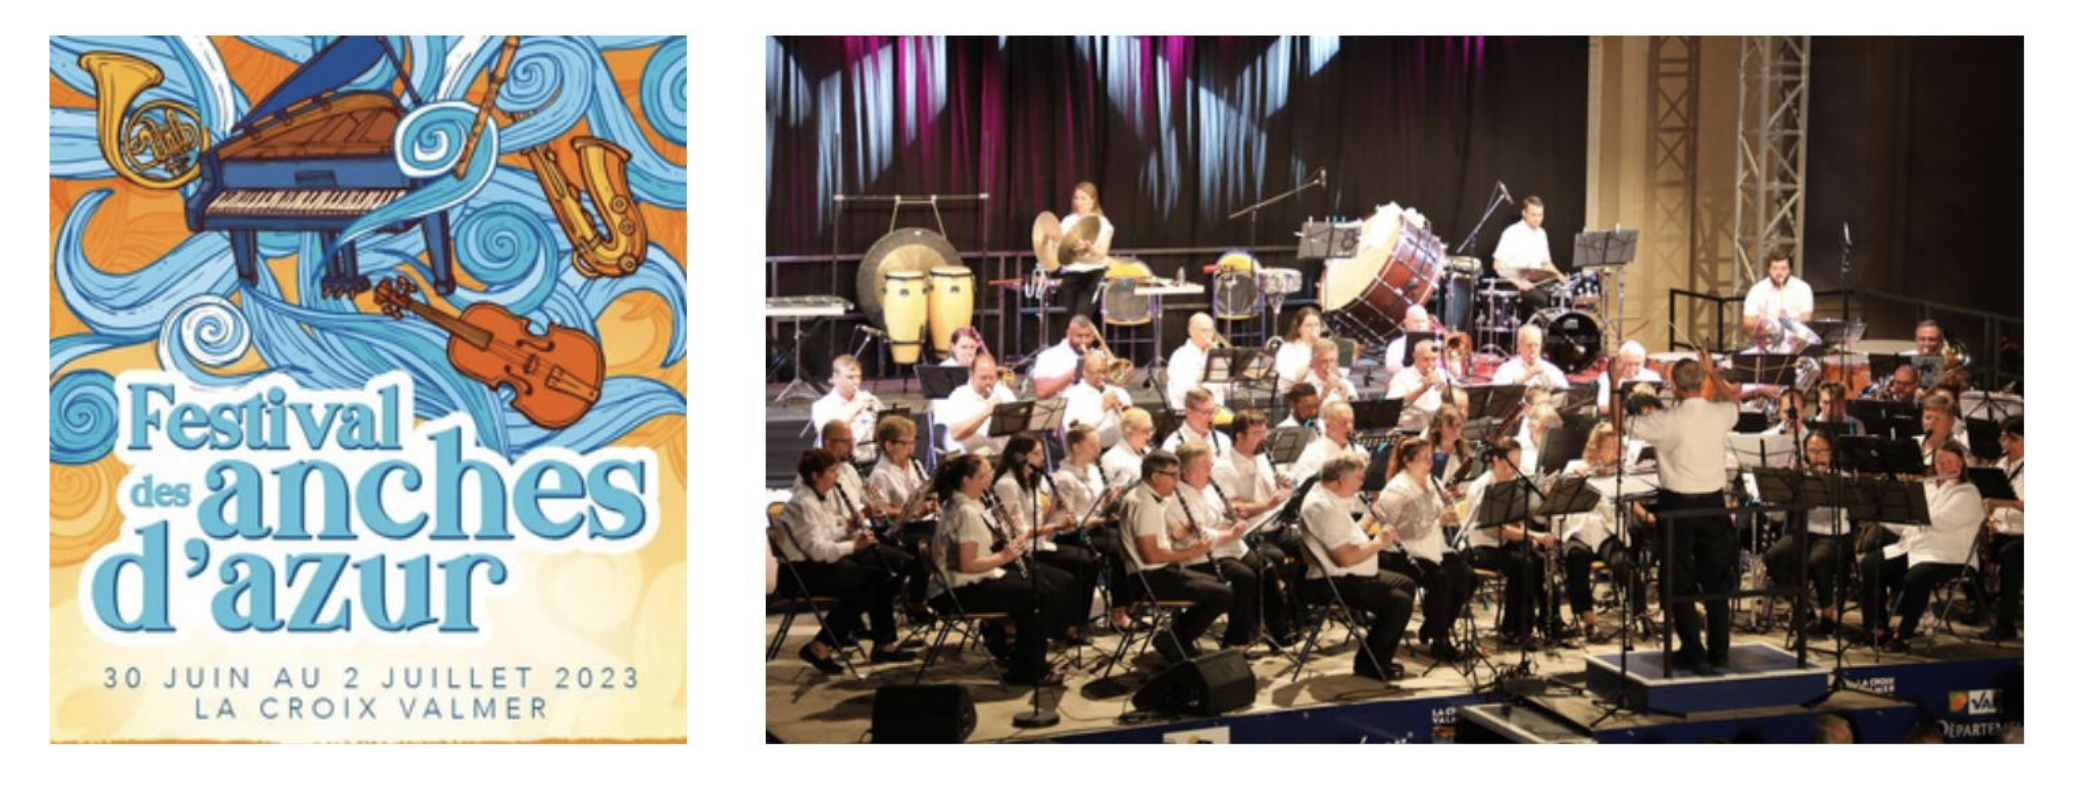 Left: the poster for the Festival des Anches d'Azur. Right: the Tara Winds on stage at the festival's opening night concert.